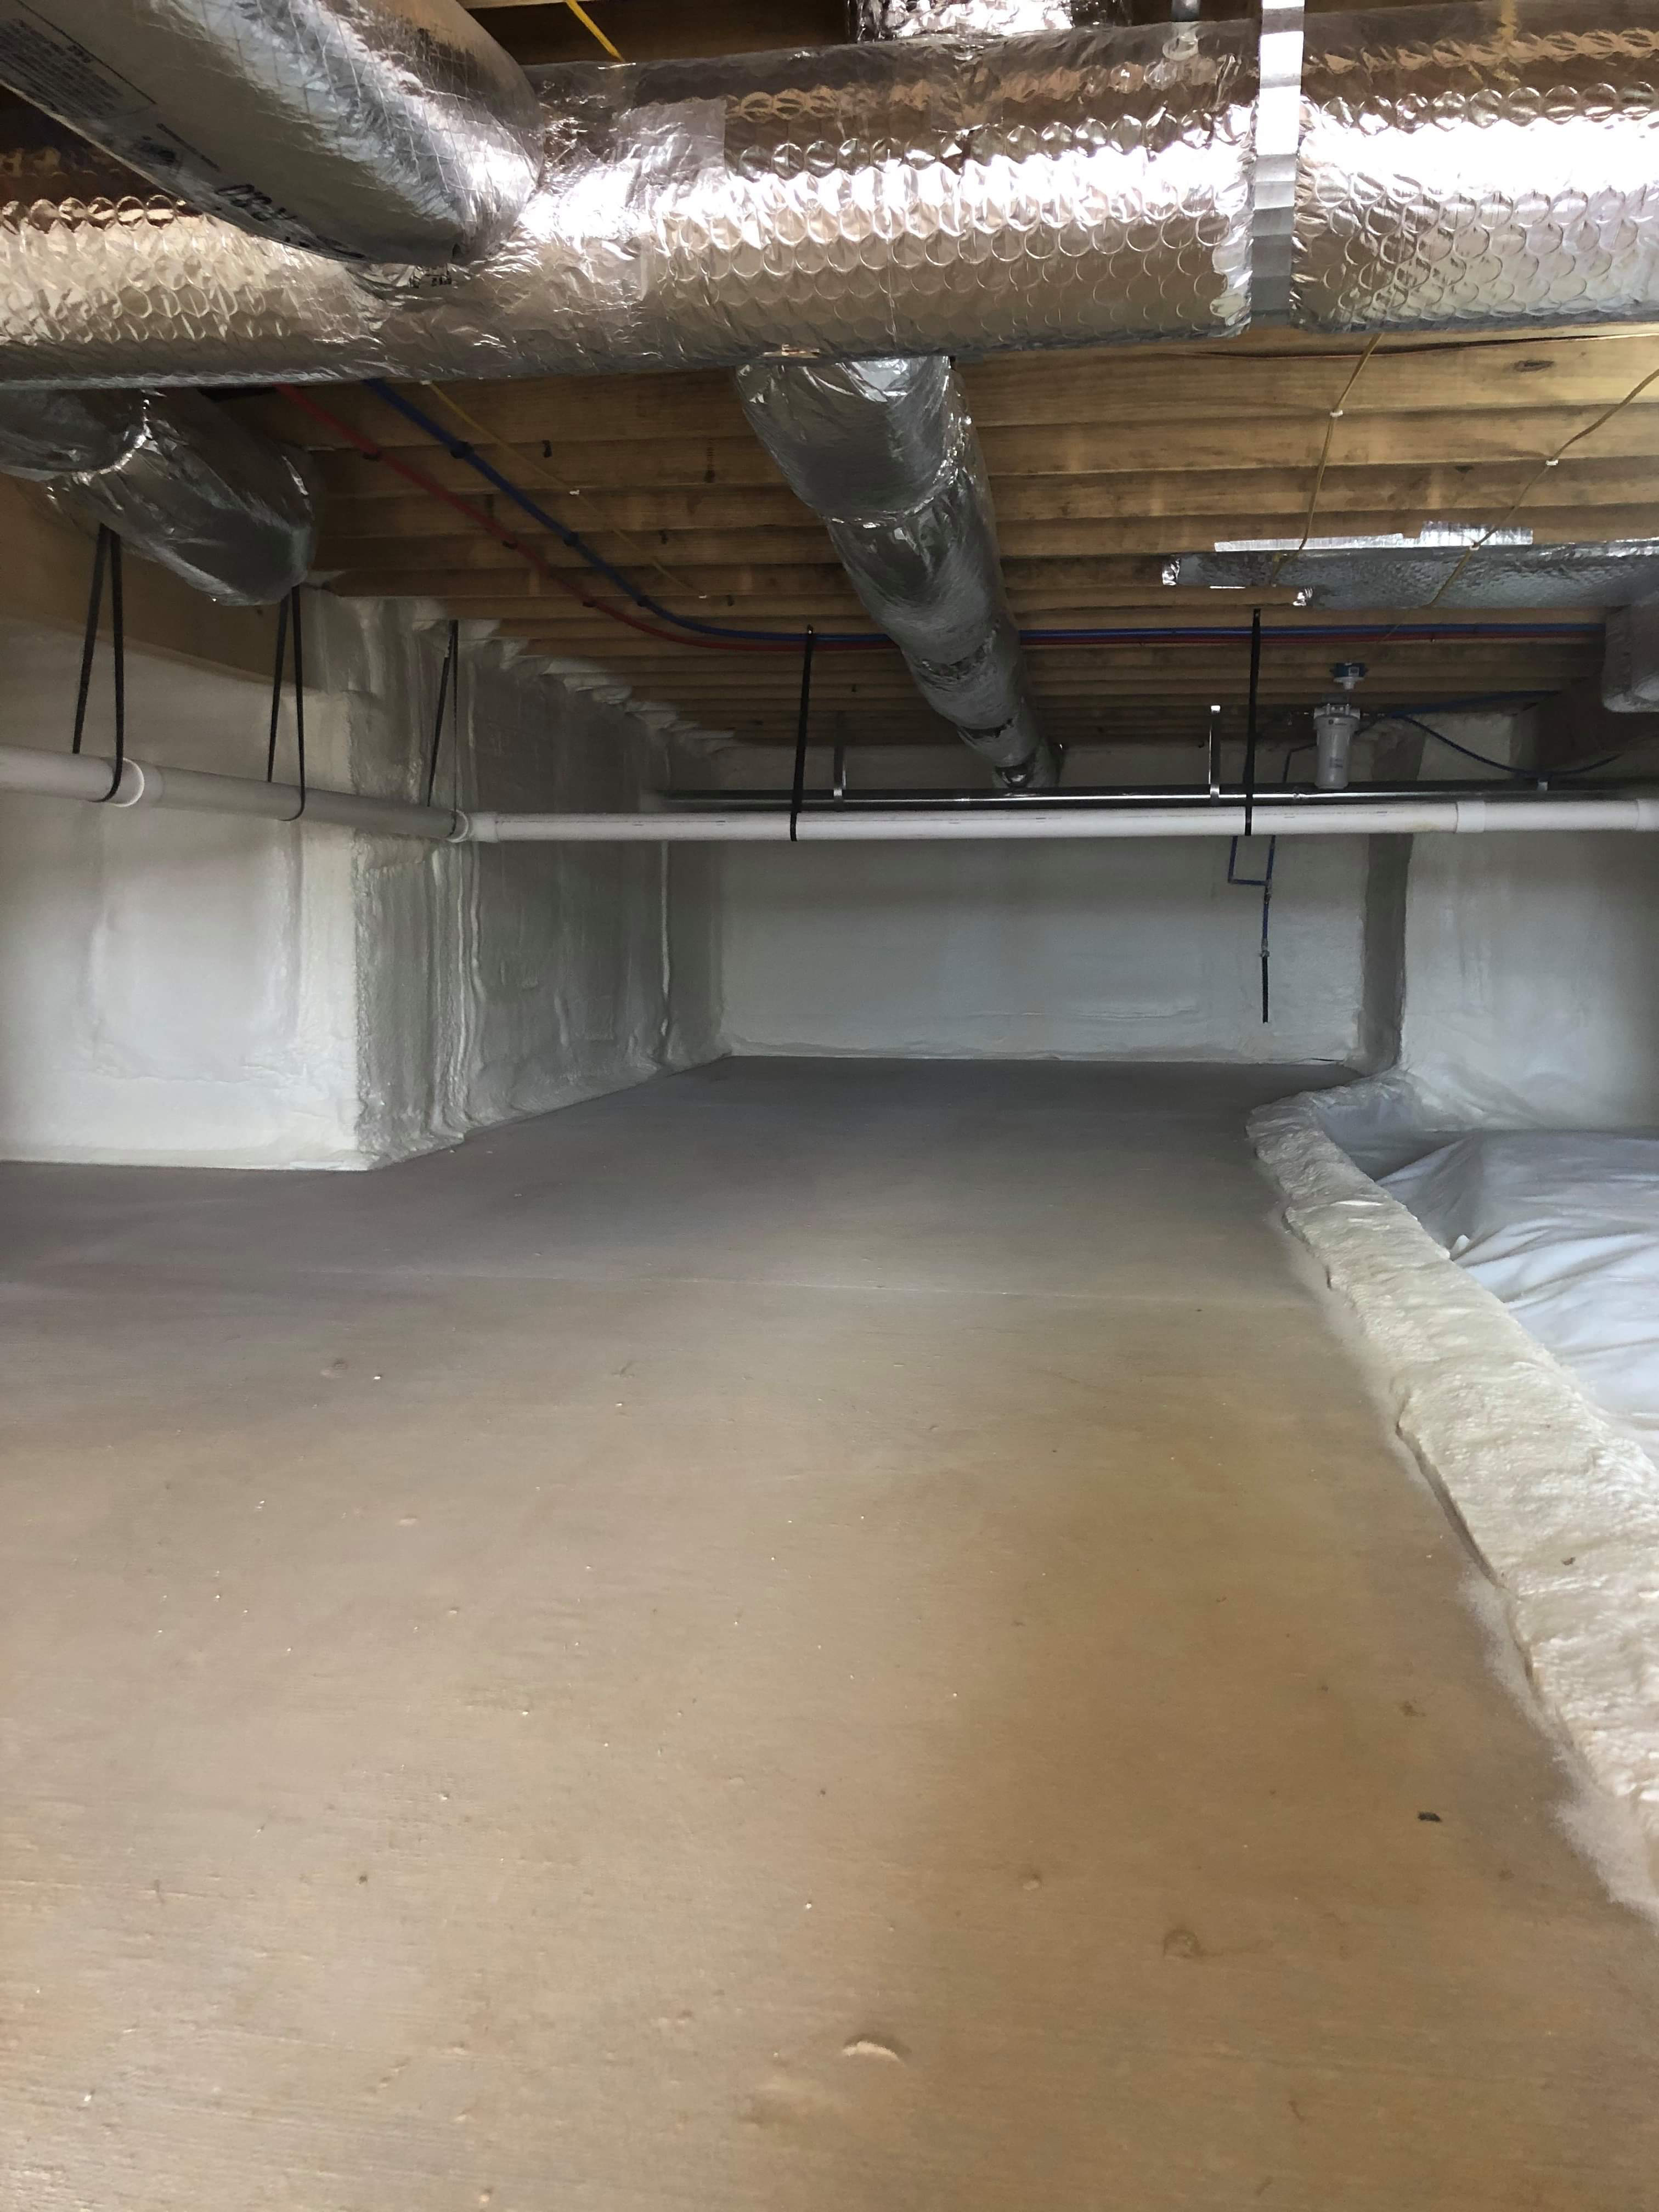 Clean ground of crawl space after insulation